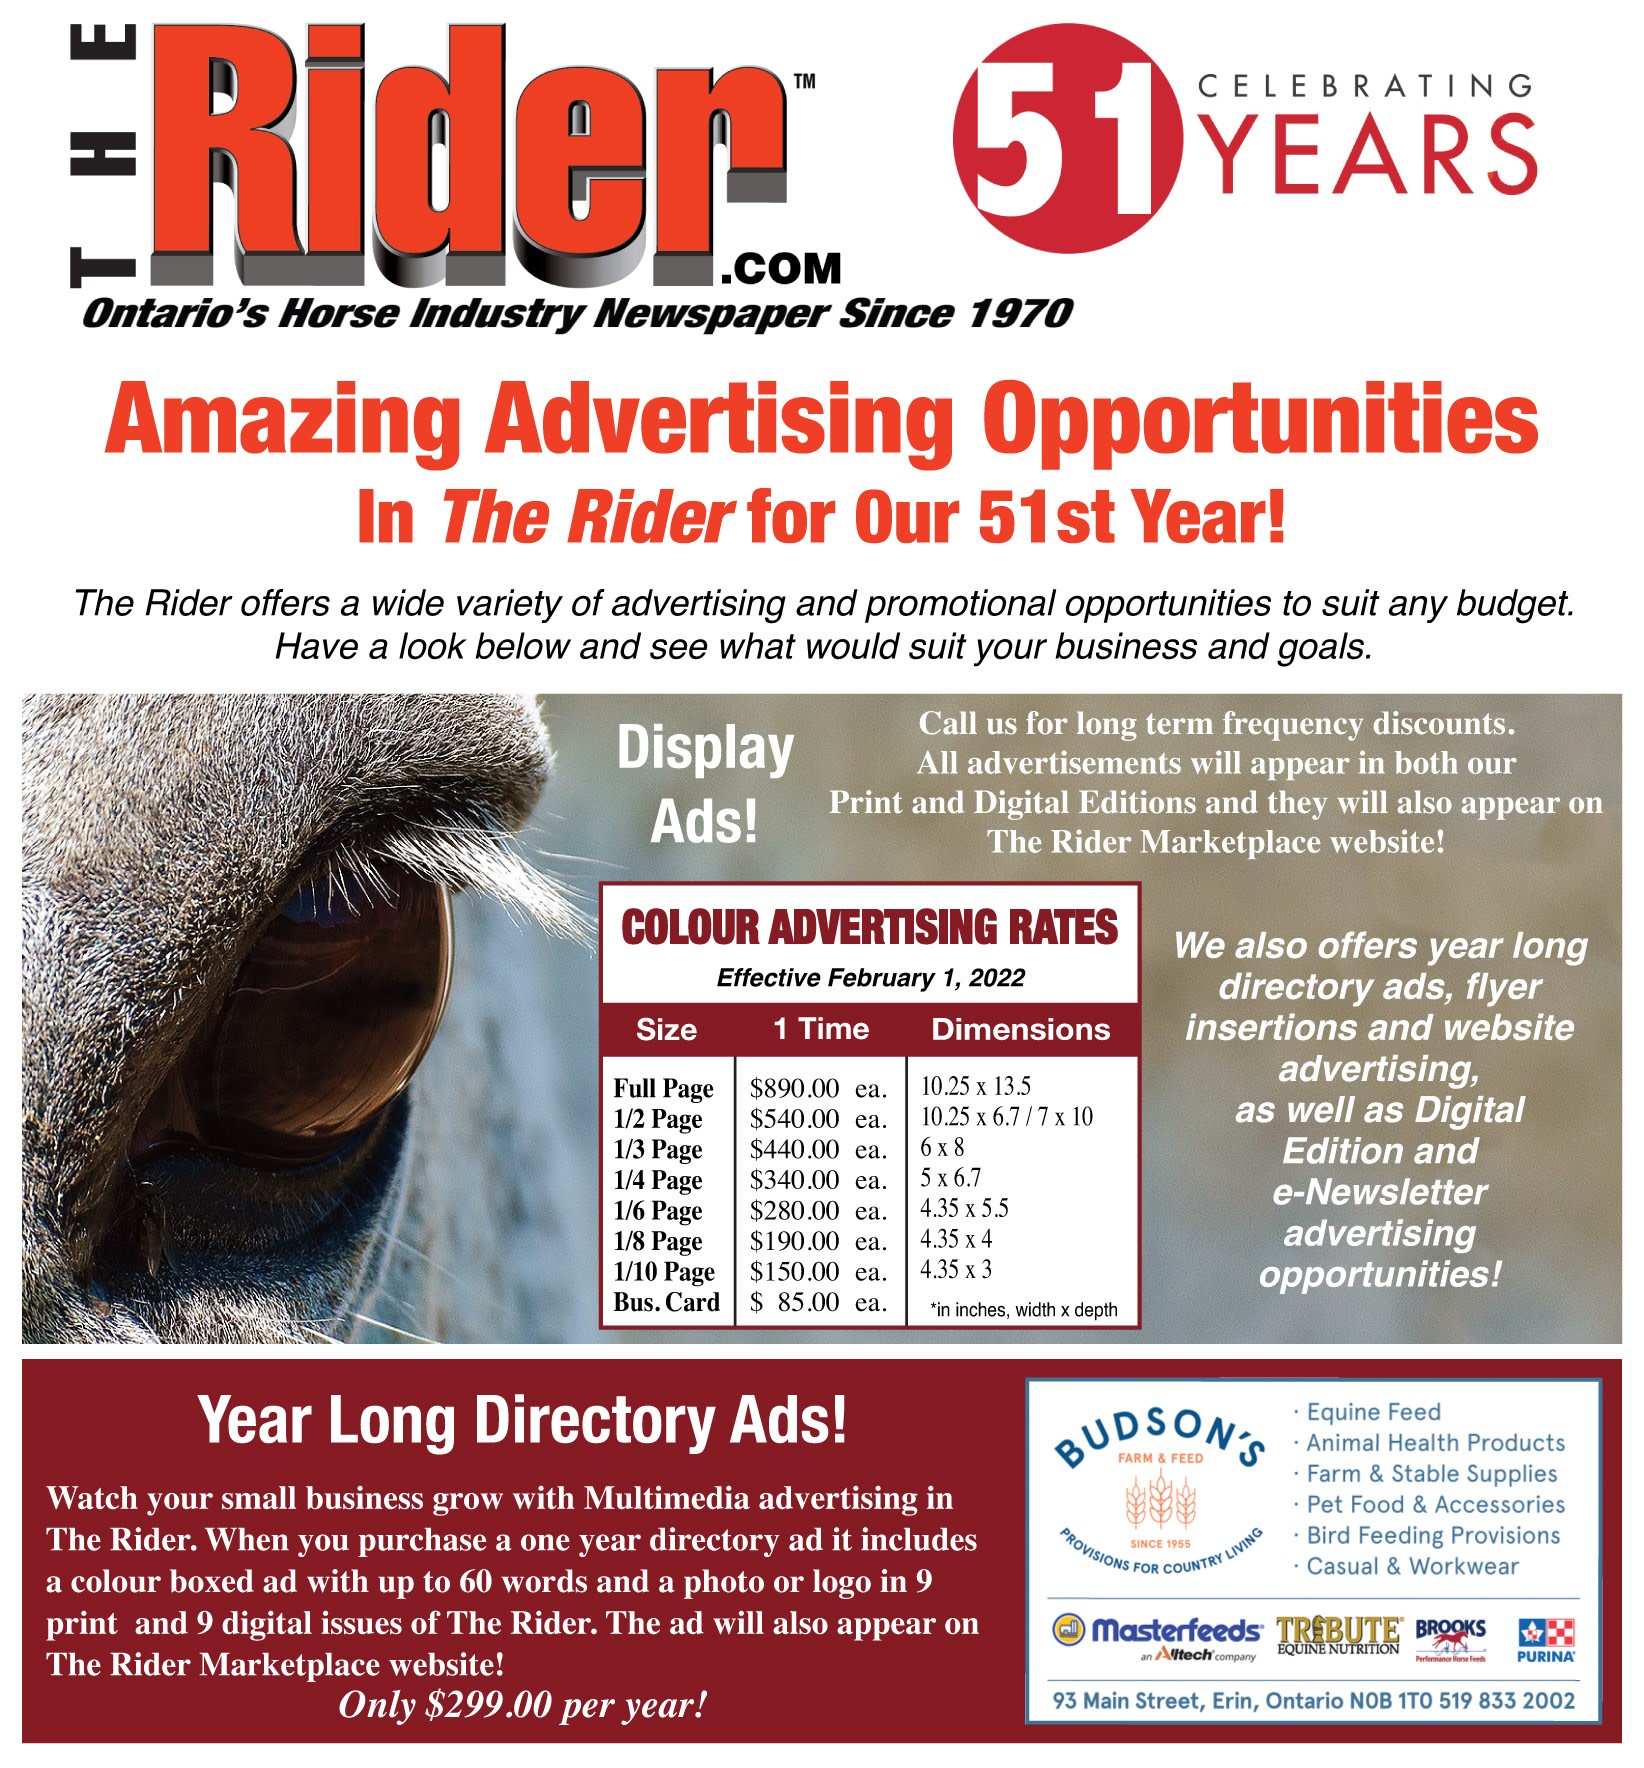 2022 TheRider.com Advertising Rate Card